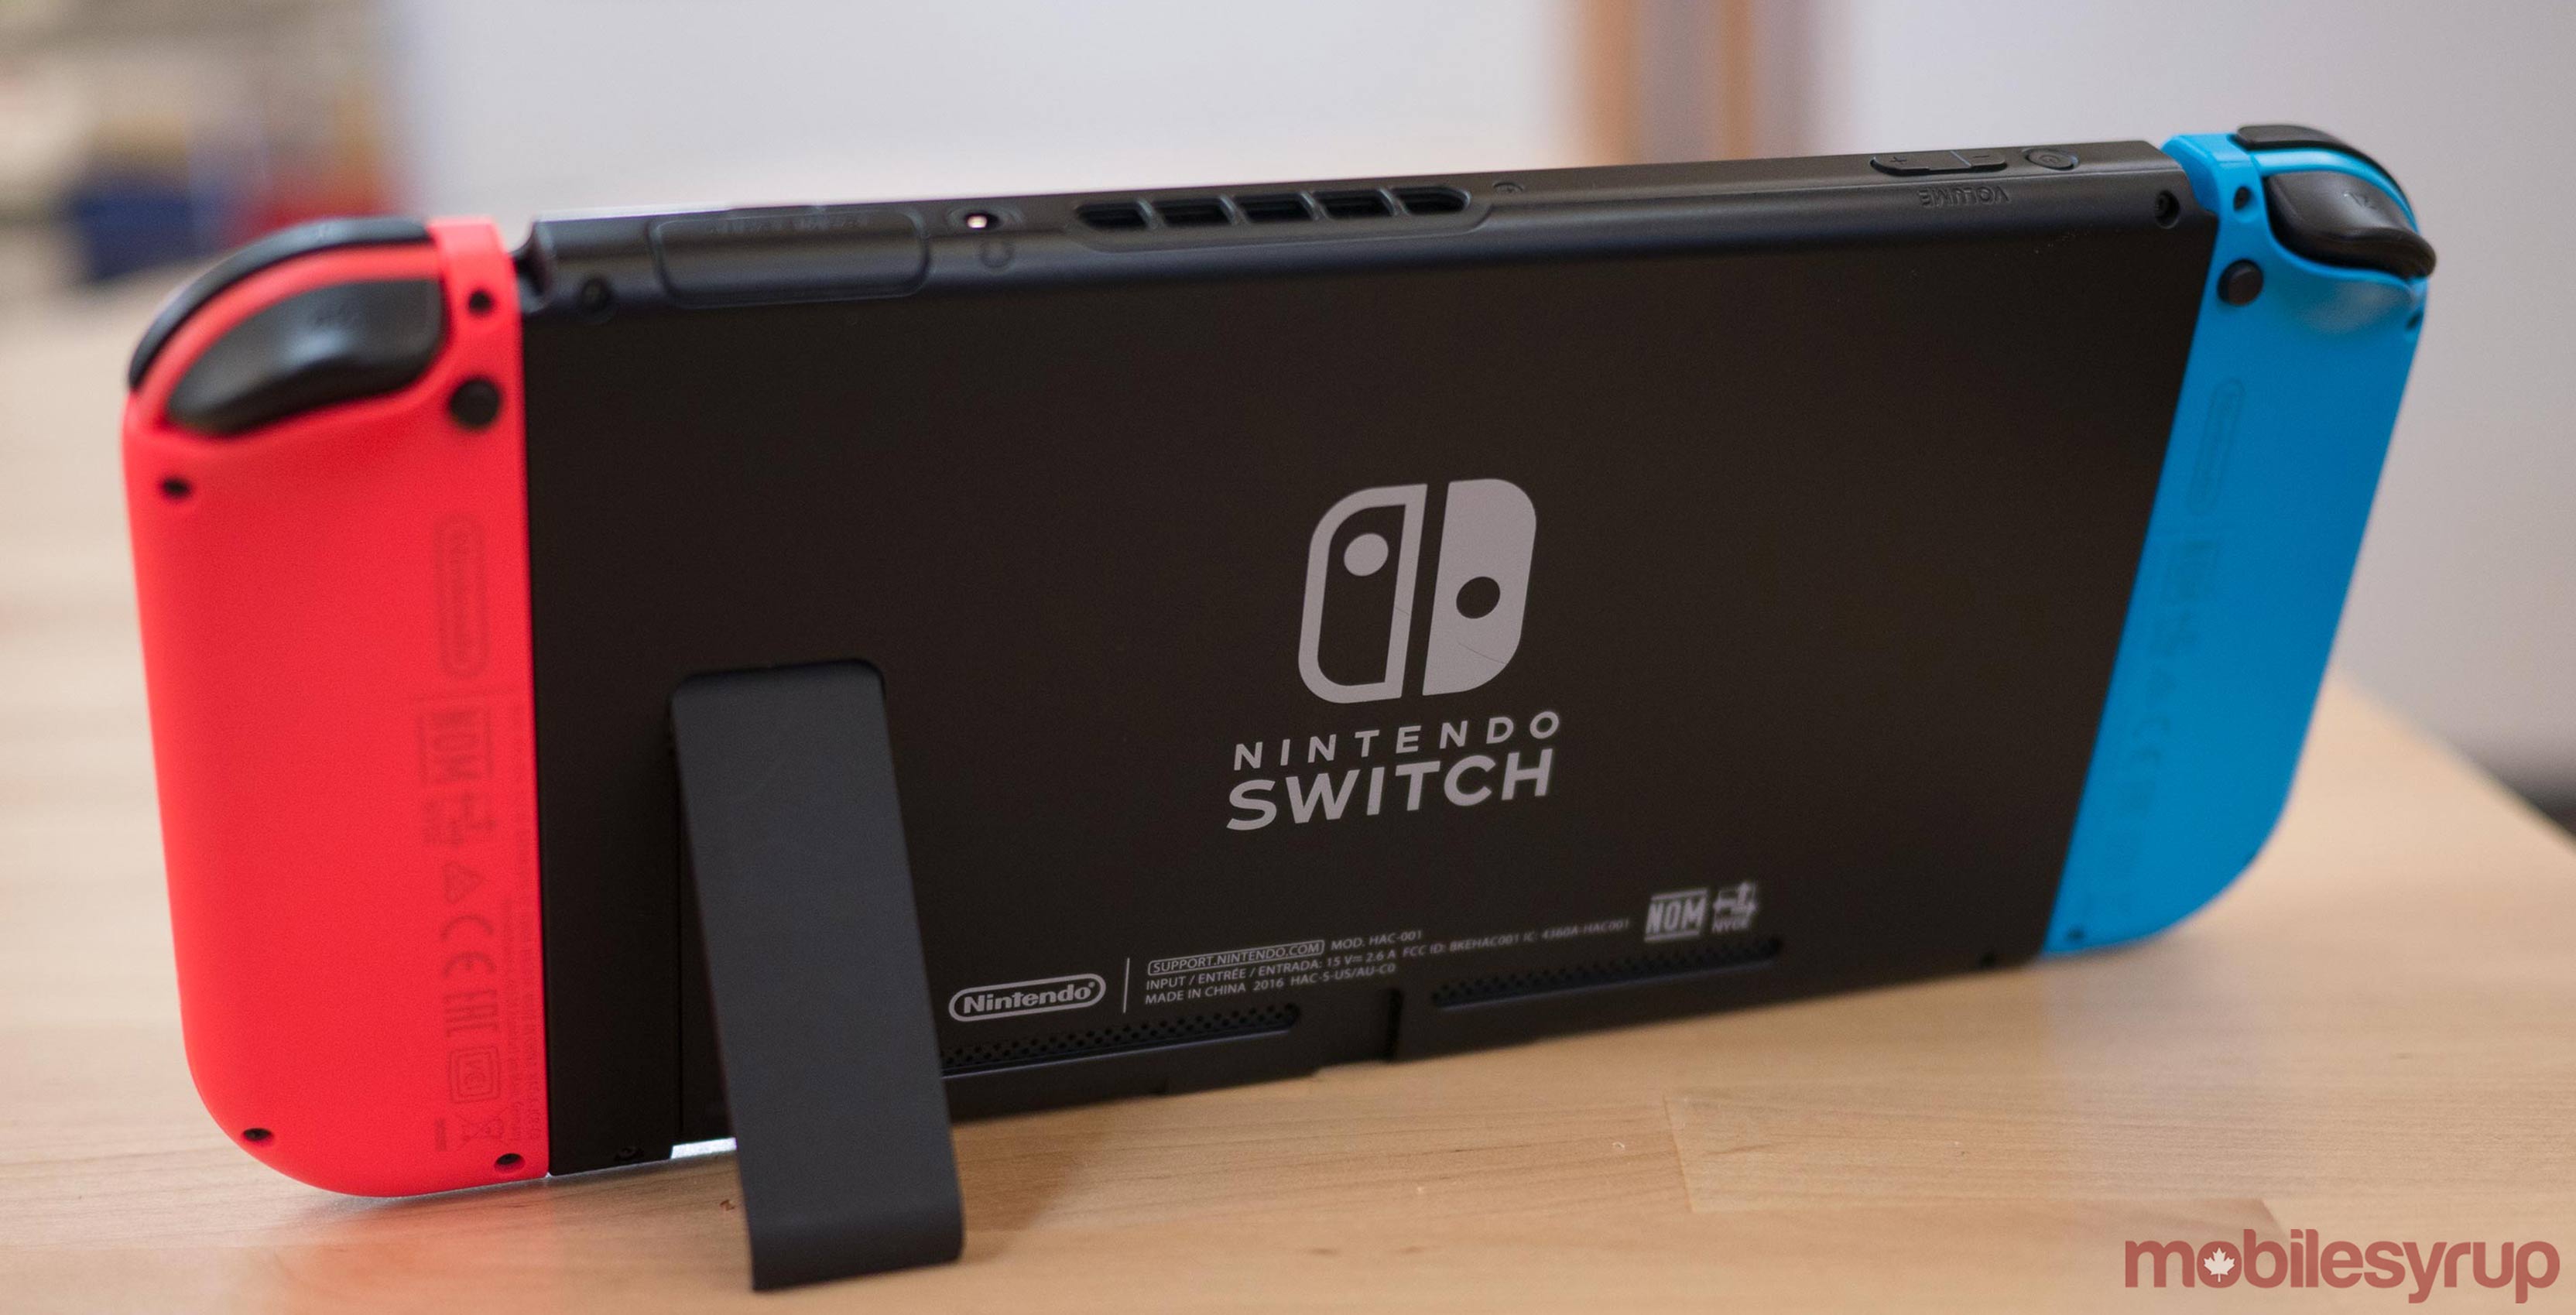 Nintendo Switch, as seen from behind